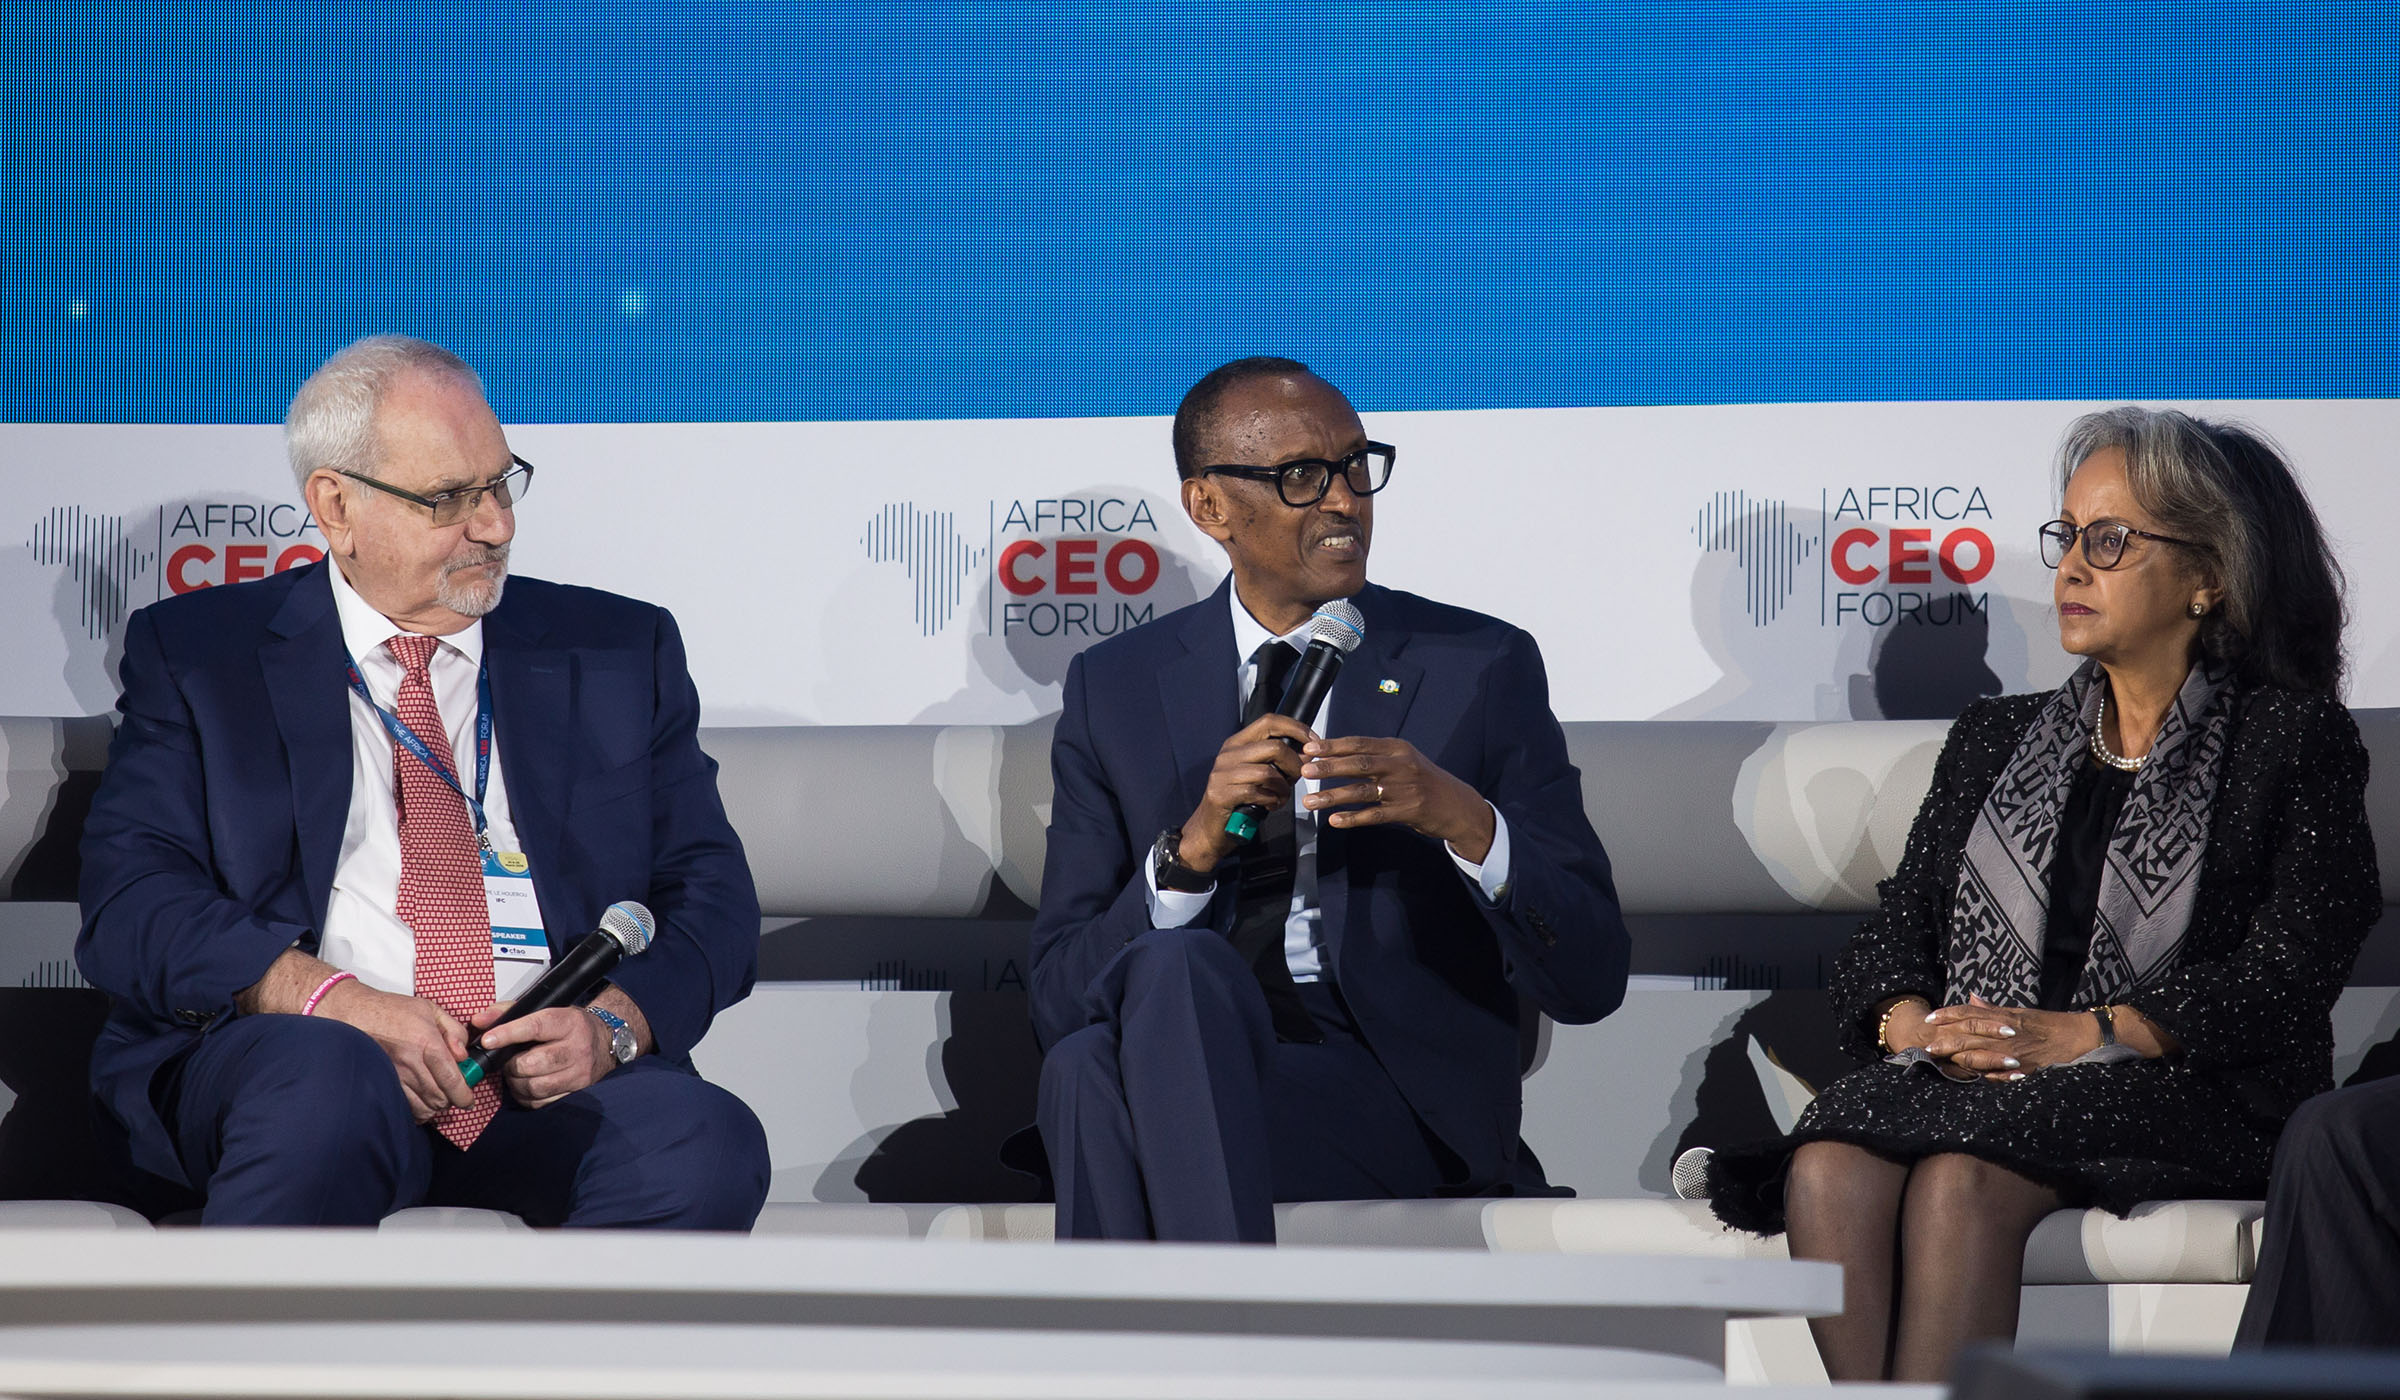 President Kagame speaks on a panel that also included President Sahle-Work Zewde of Ethiopia and Philippe Le Houu00e9rou, the Chief Executive Officer of the International Finance Cooperation (left), on Day I of the Africa CEO Forum in Kigali yesterday. Village Urugwiro.